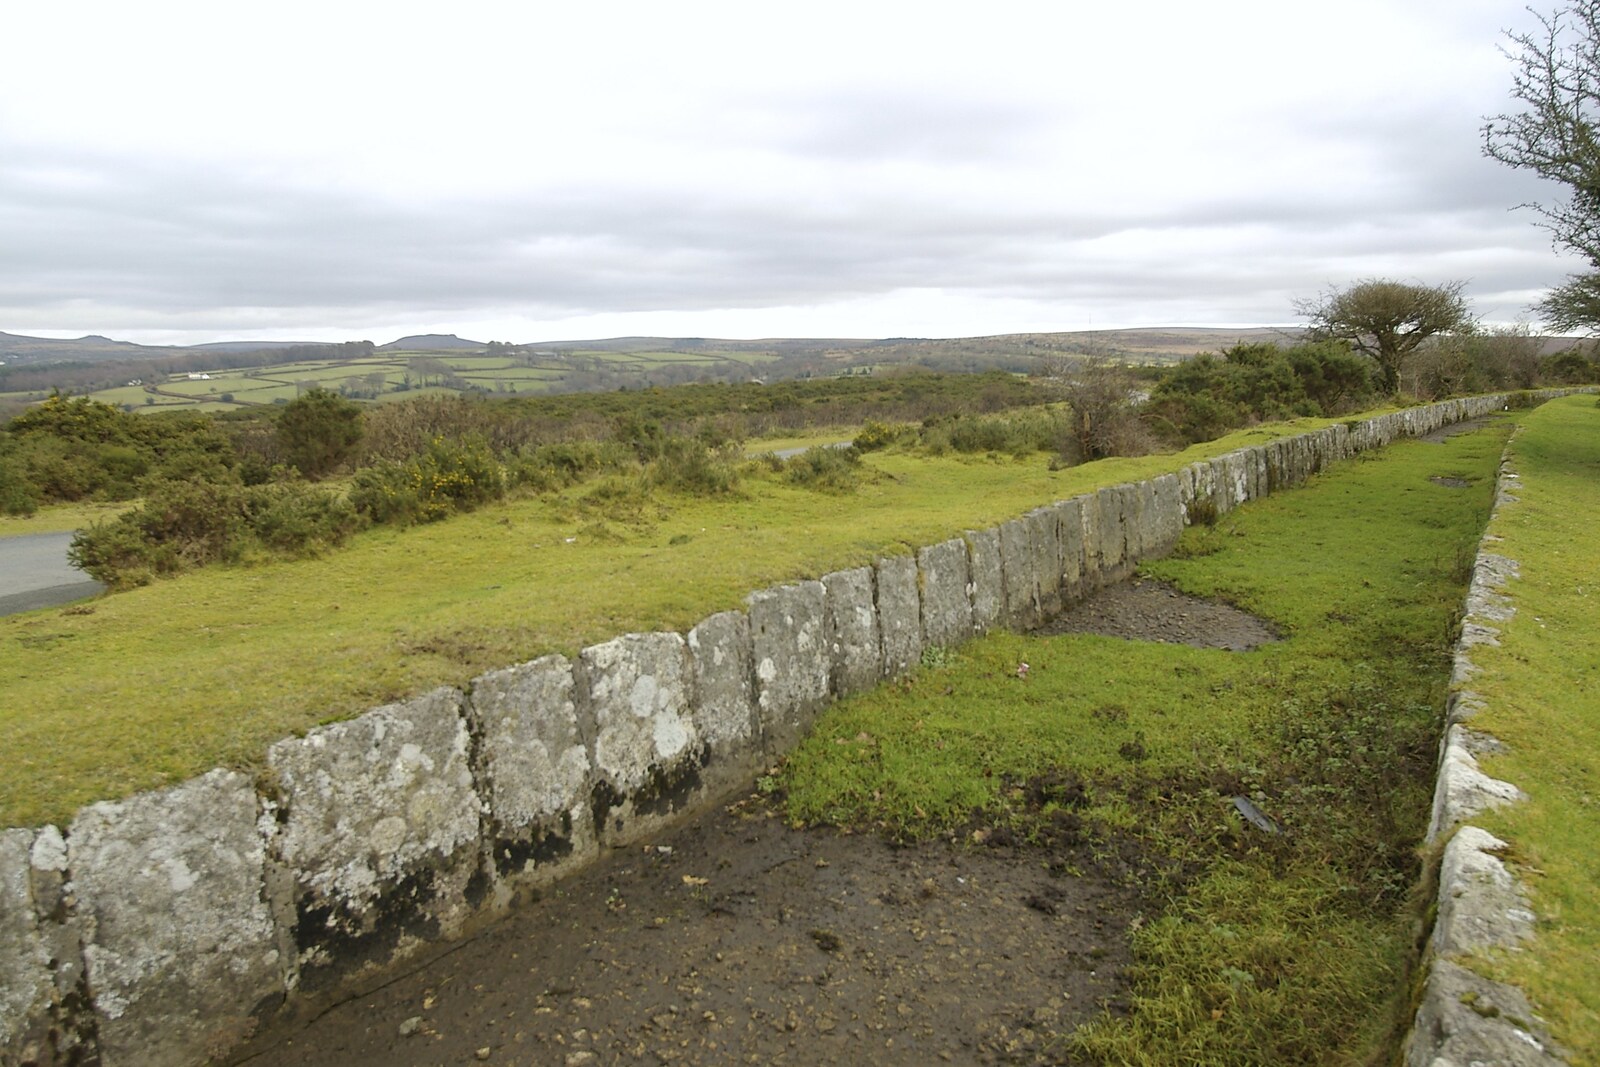 A stone-lined old aquaduct from A Wander Around Hoo Meavy and Burrator, Dartmoor, Devon - 18th December 2005